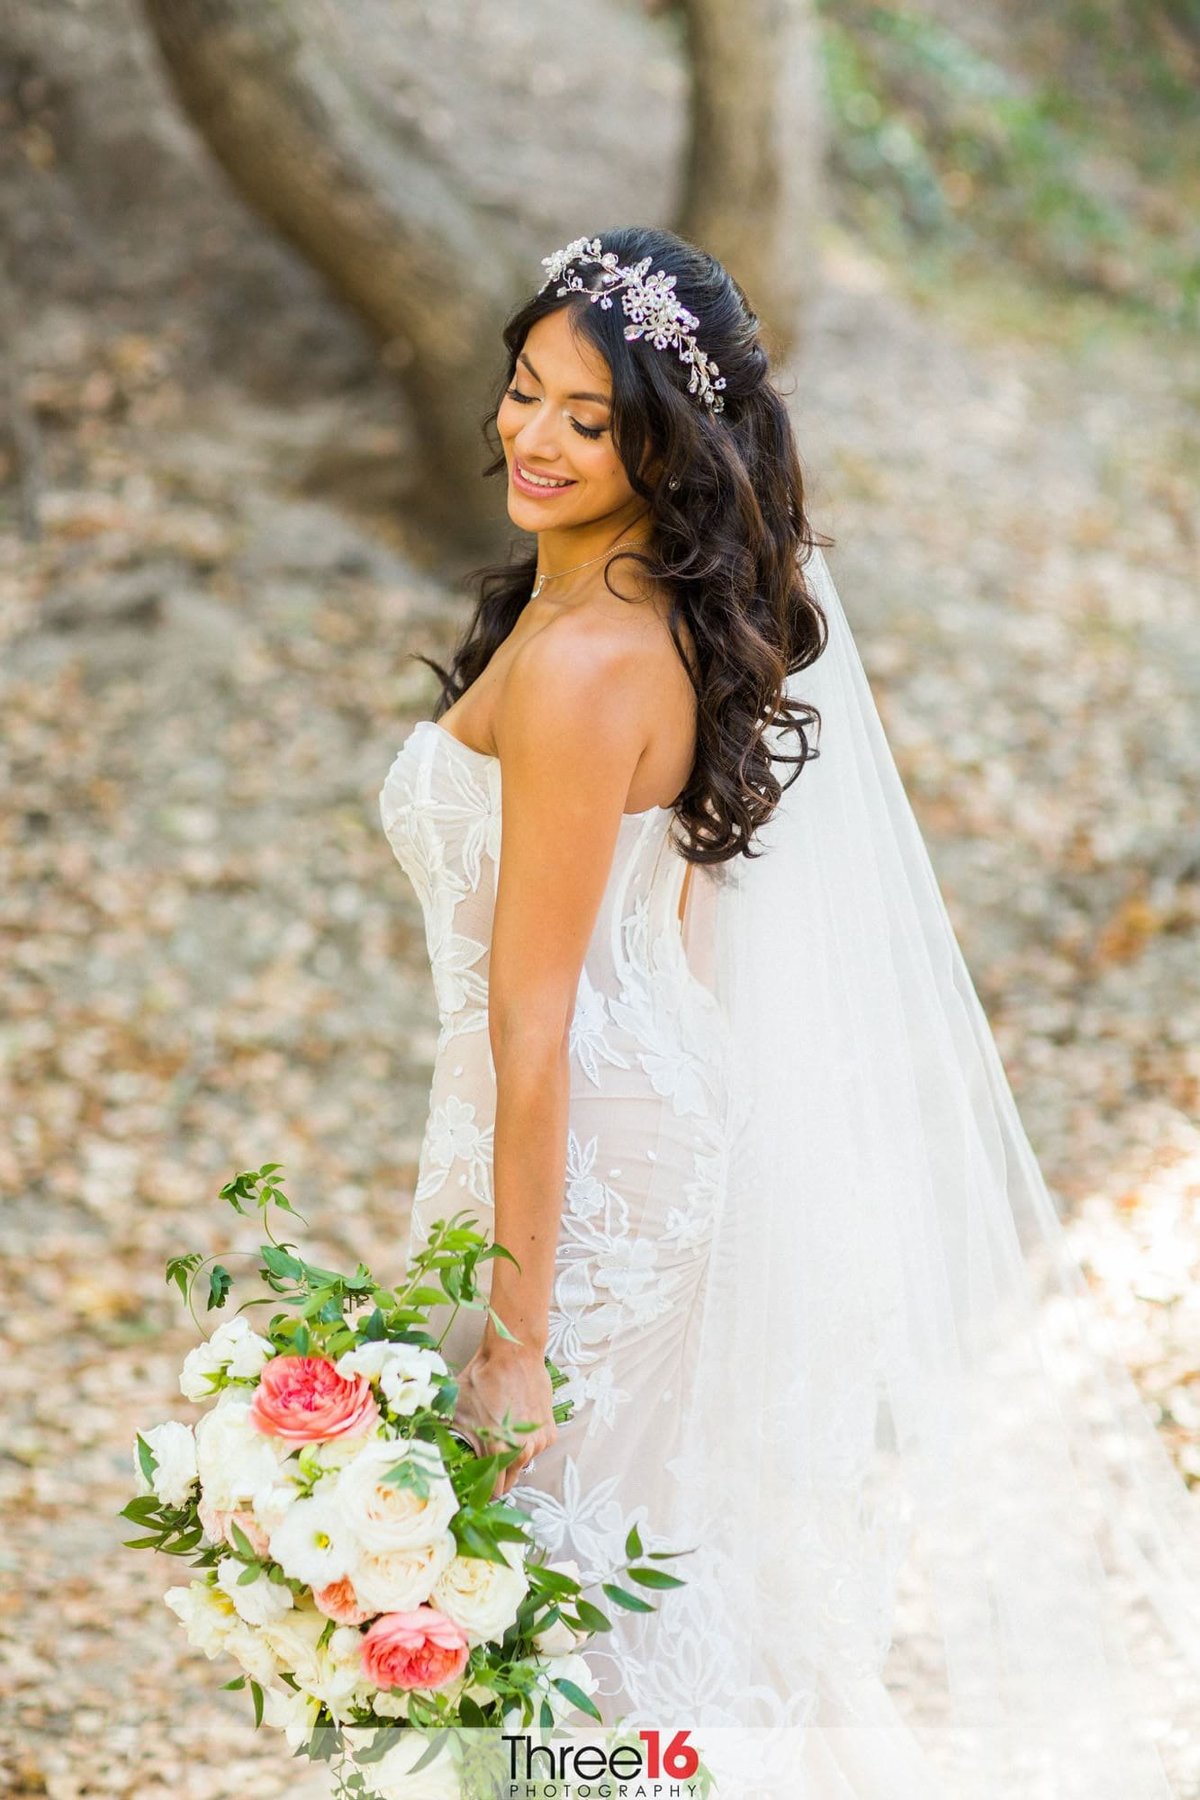 Beautiful Bride poses for the photographer